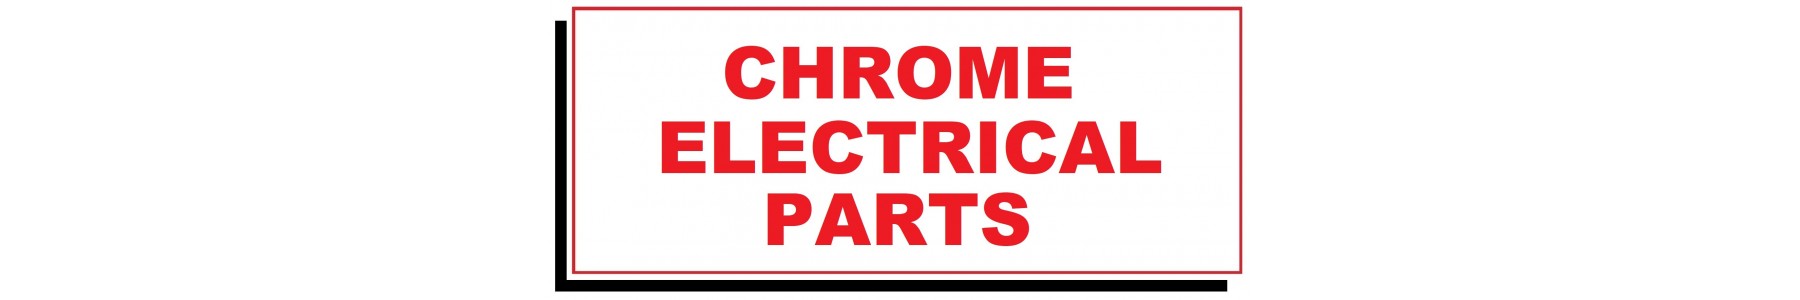 CHROME ELECTRICAL PARTS